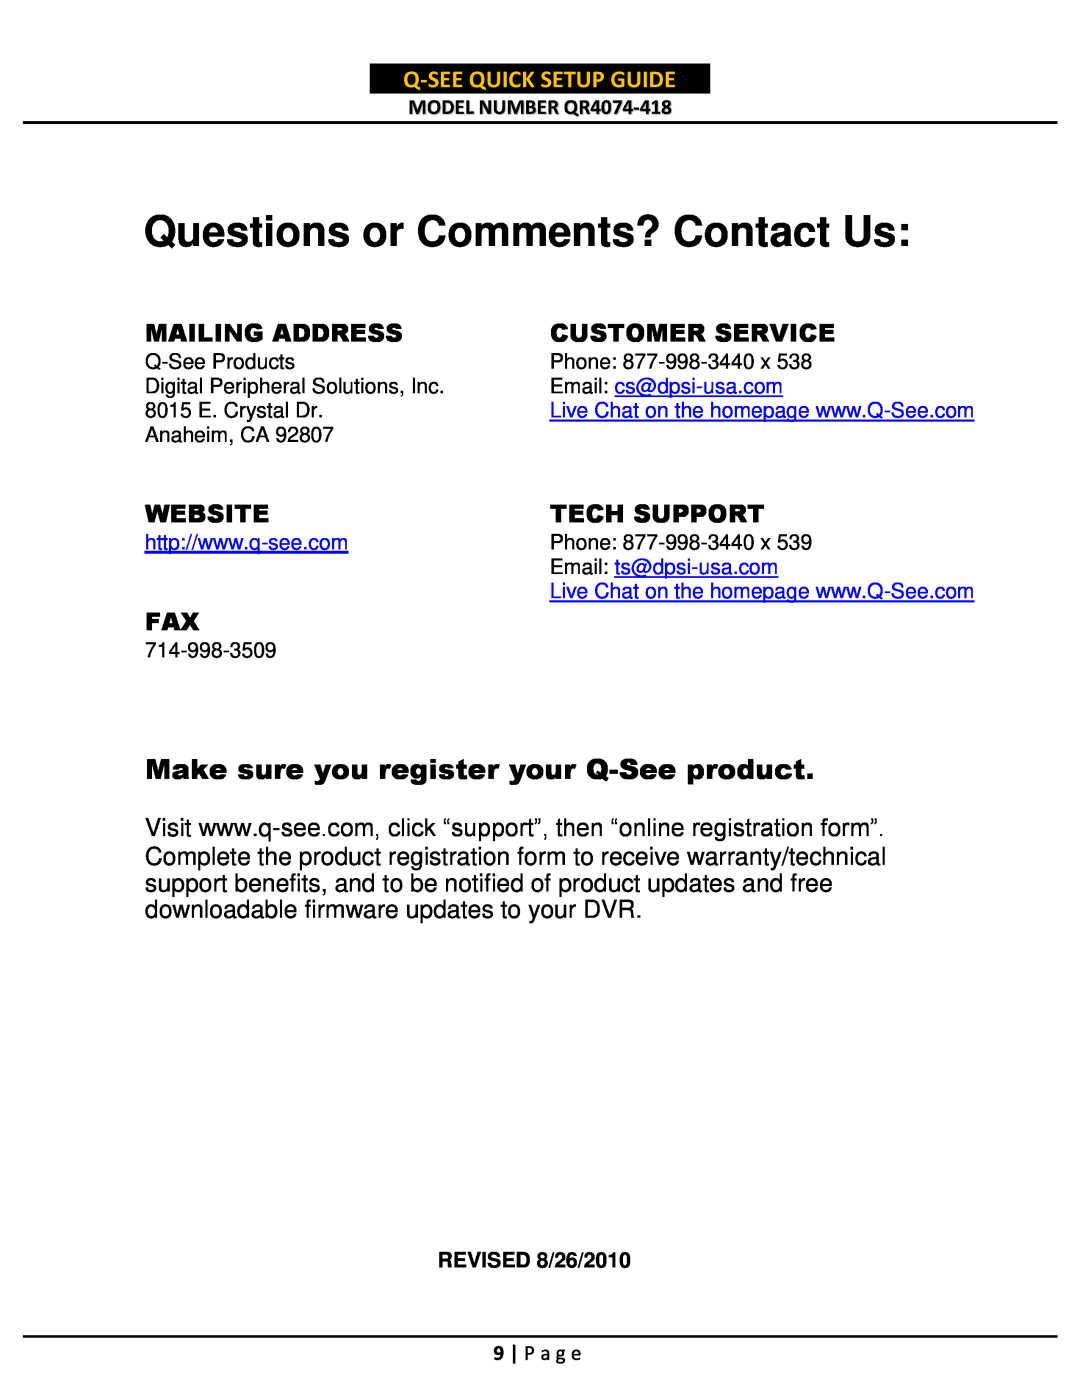 Q-See QR4074-418 Questions or Comments? Contact Us, Make sure you register your Q-Seeproduct, Mailing Address, Website 